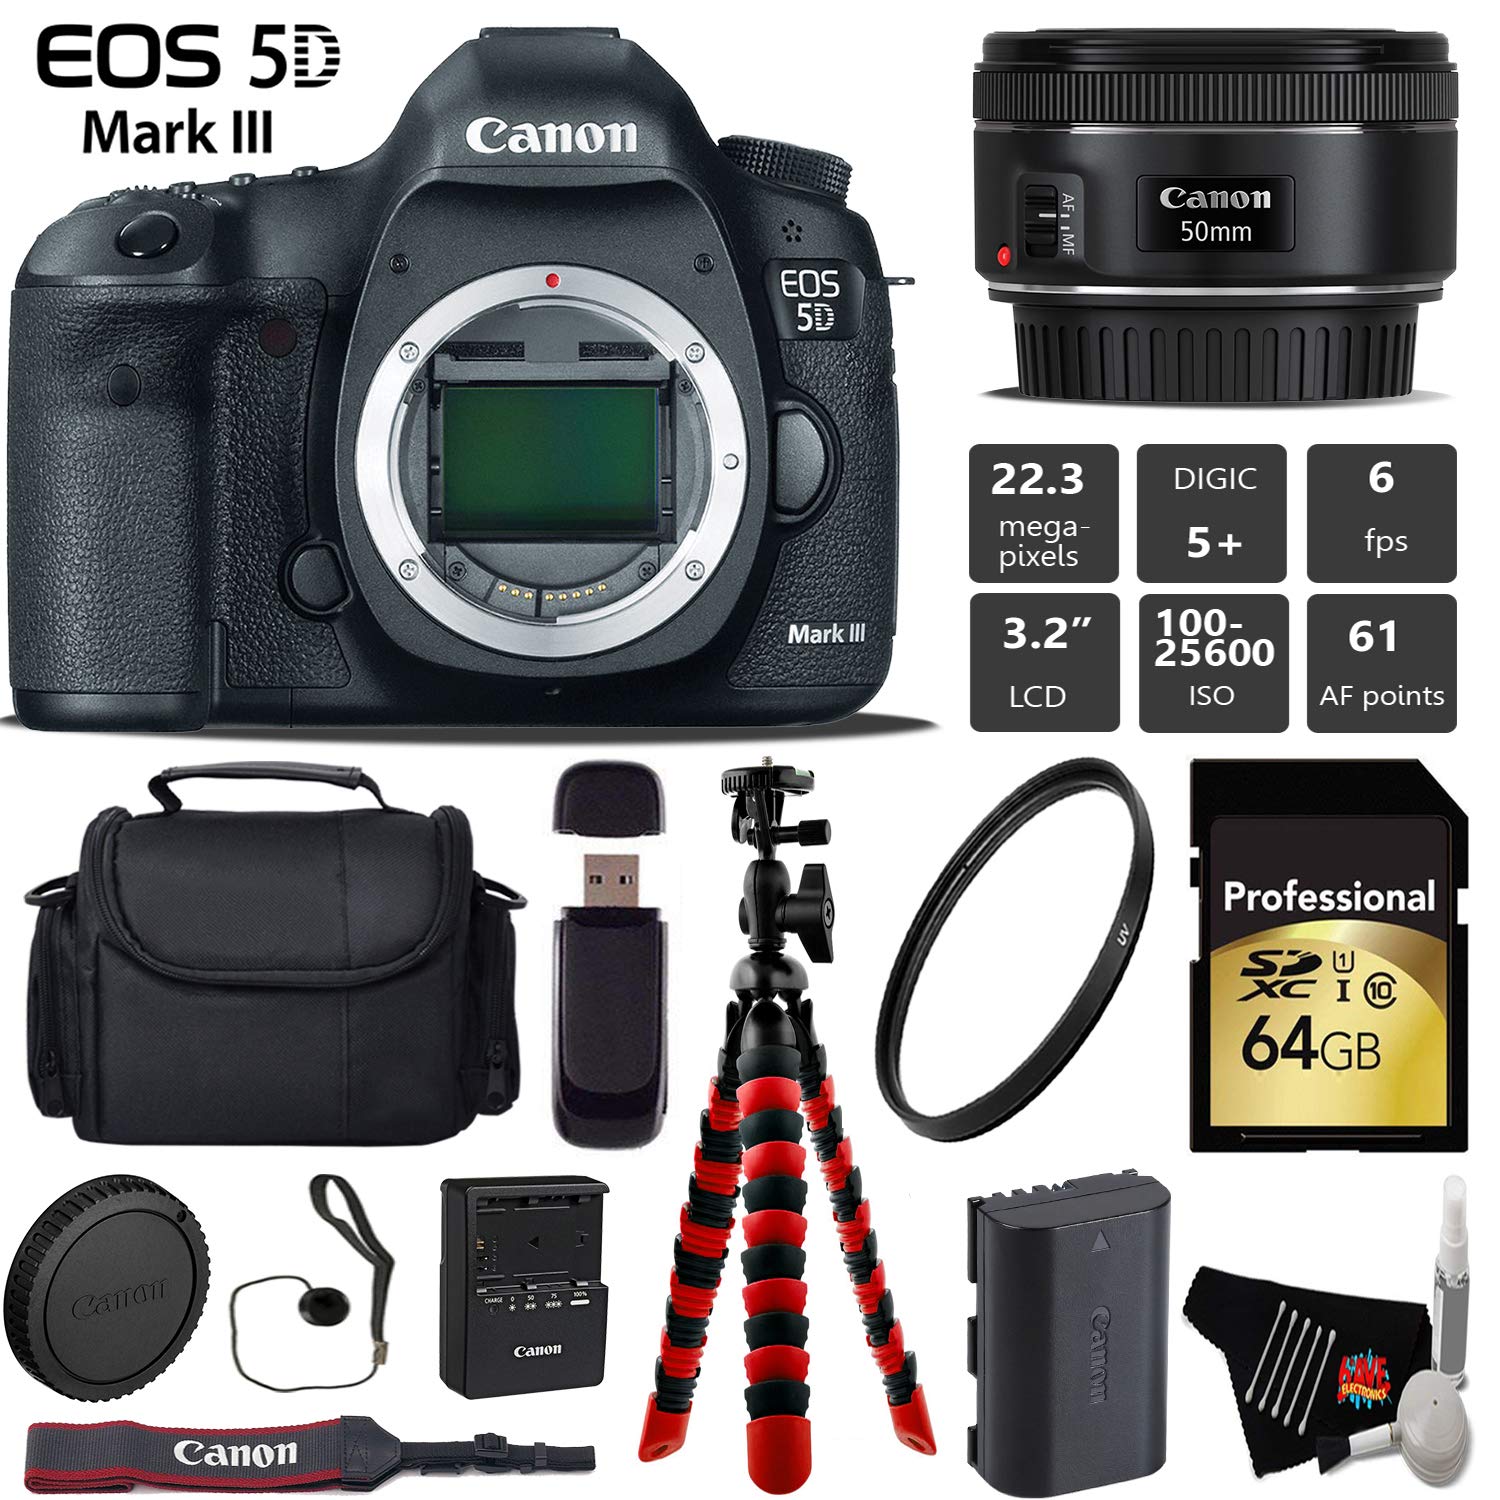 Canon EOS 5D Mark III DSLR Camera with 50mm f/1.8 STM Lens + Wireless Remote + UV Protection Filter + Case + Wrist Strap Pro Bundle